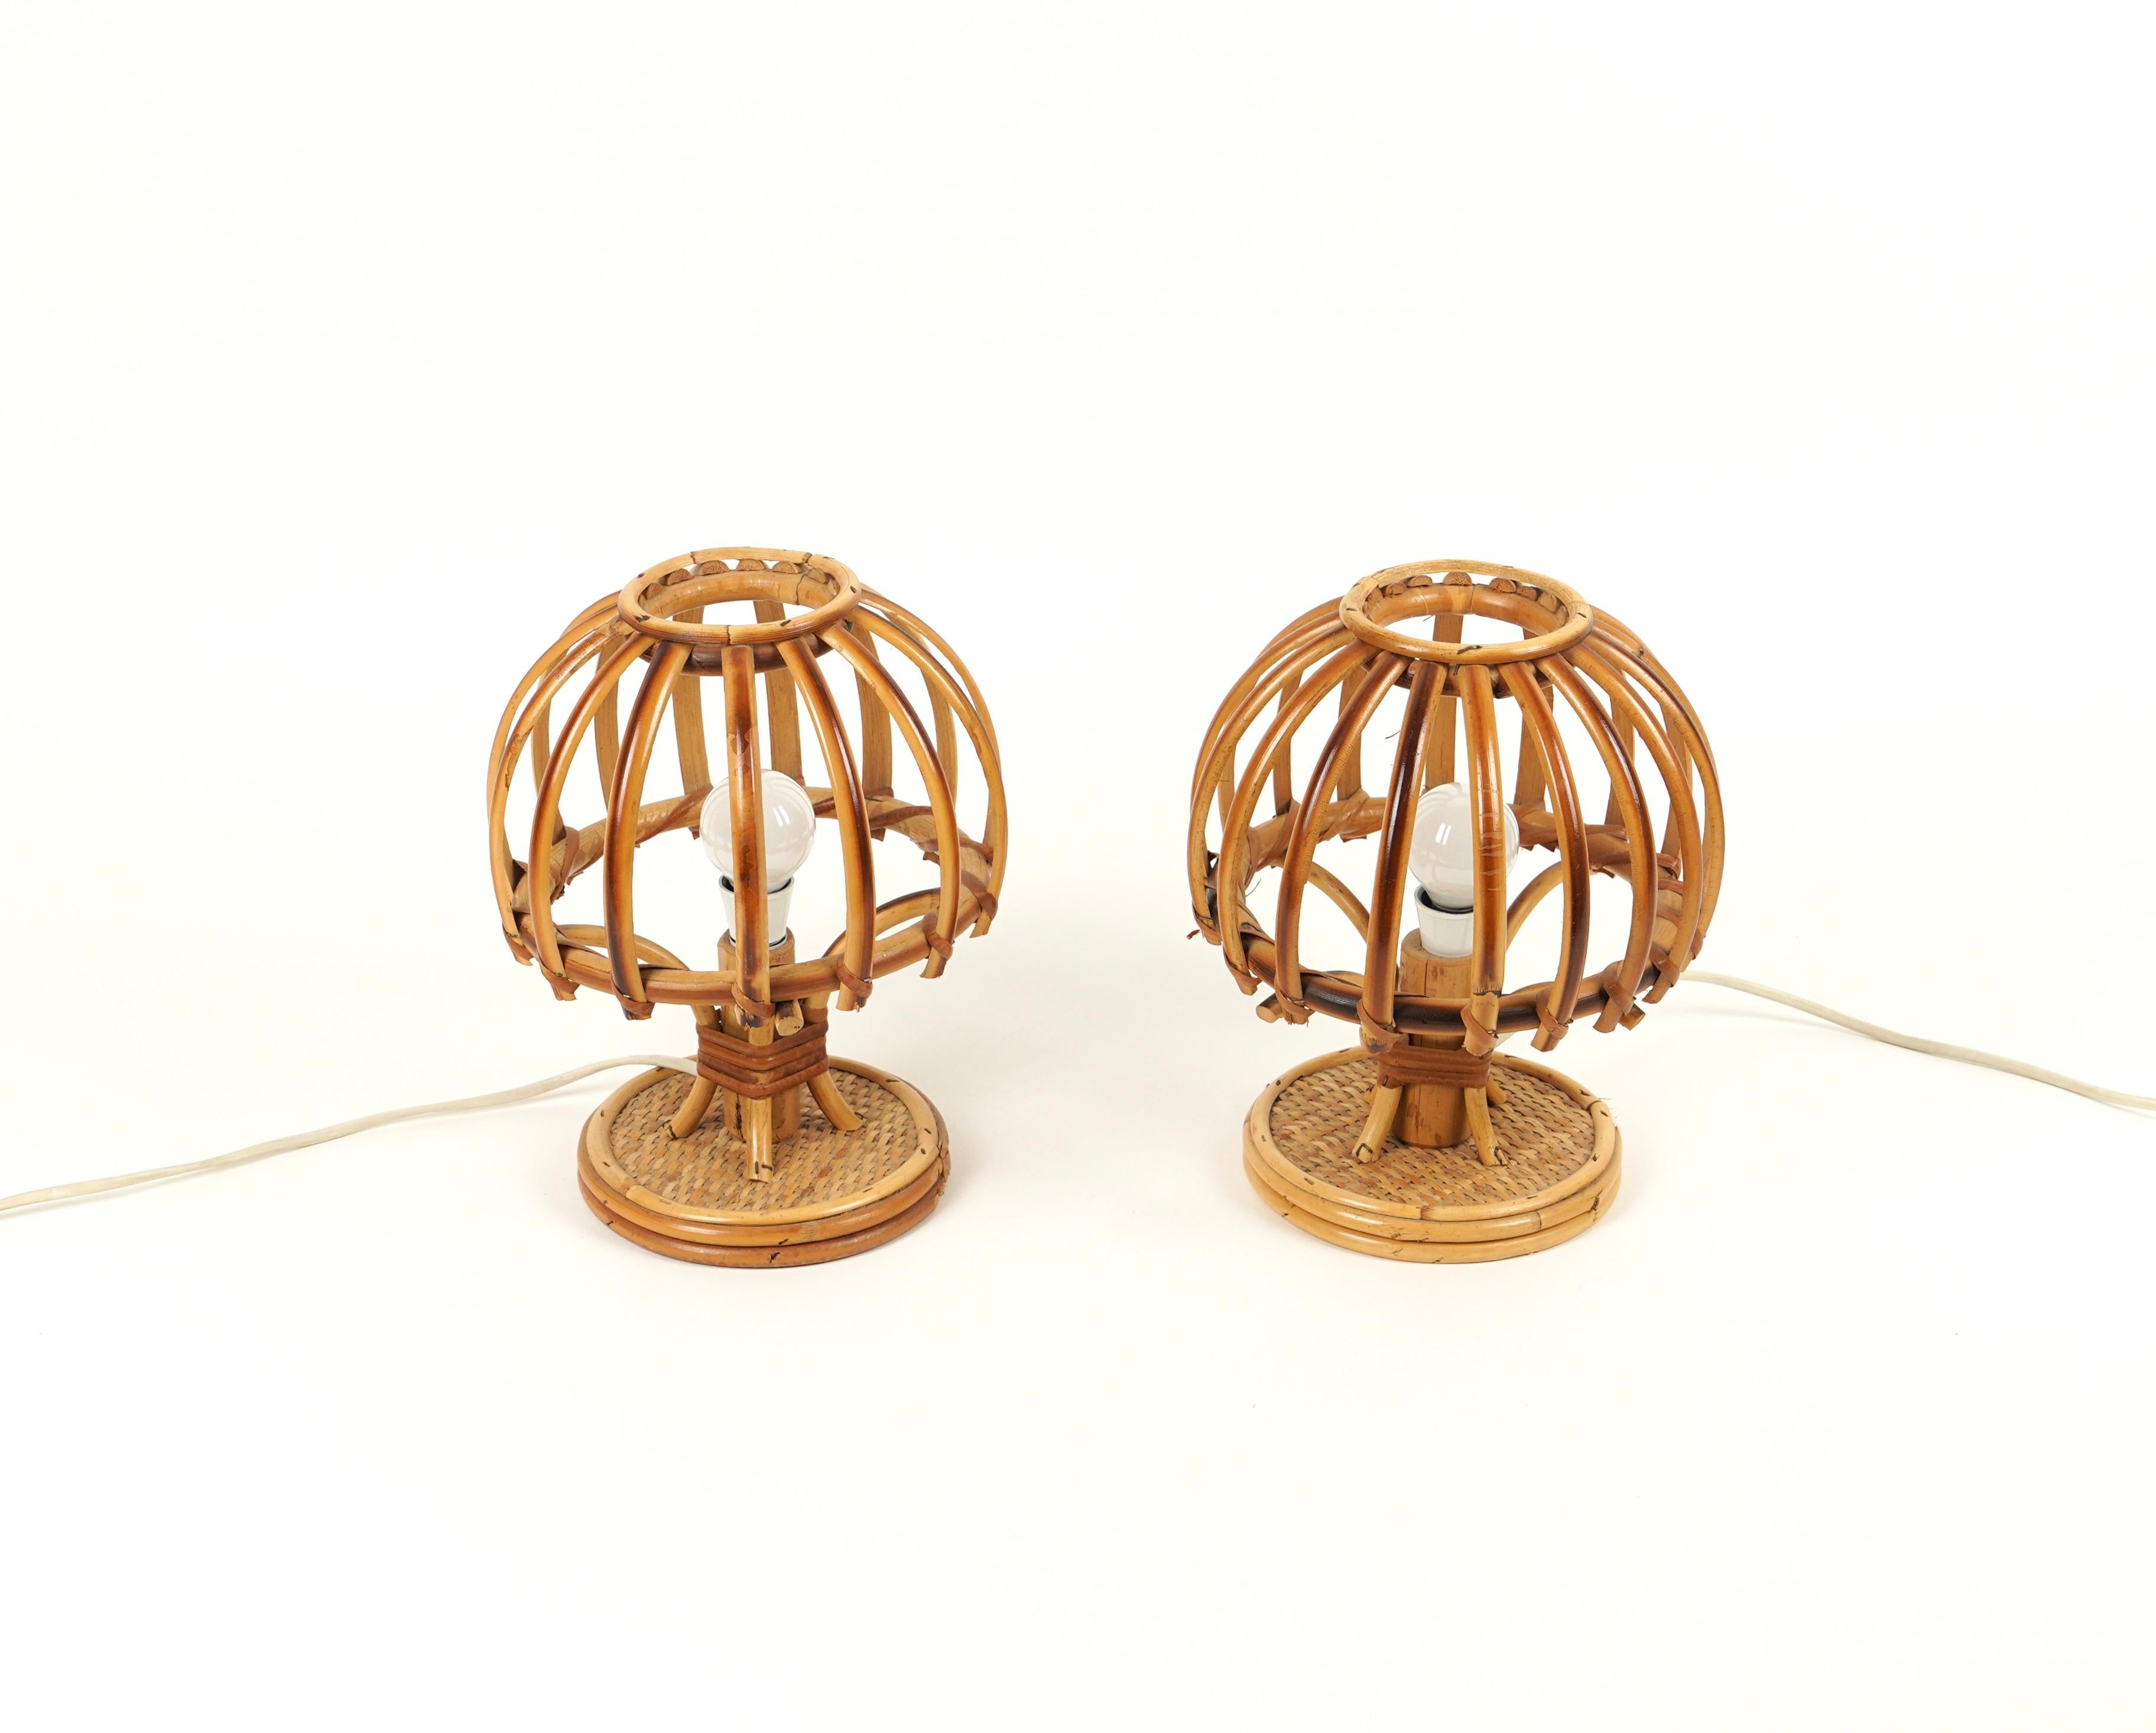 Mid-Century Modern Midcentury Bamboo and Rattan Pair of Table Lamps Louis Sognot Style Italy, 1970s For Sale